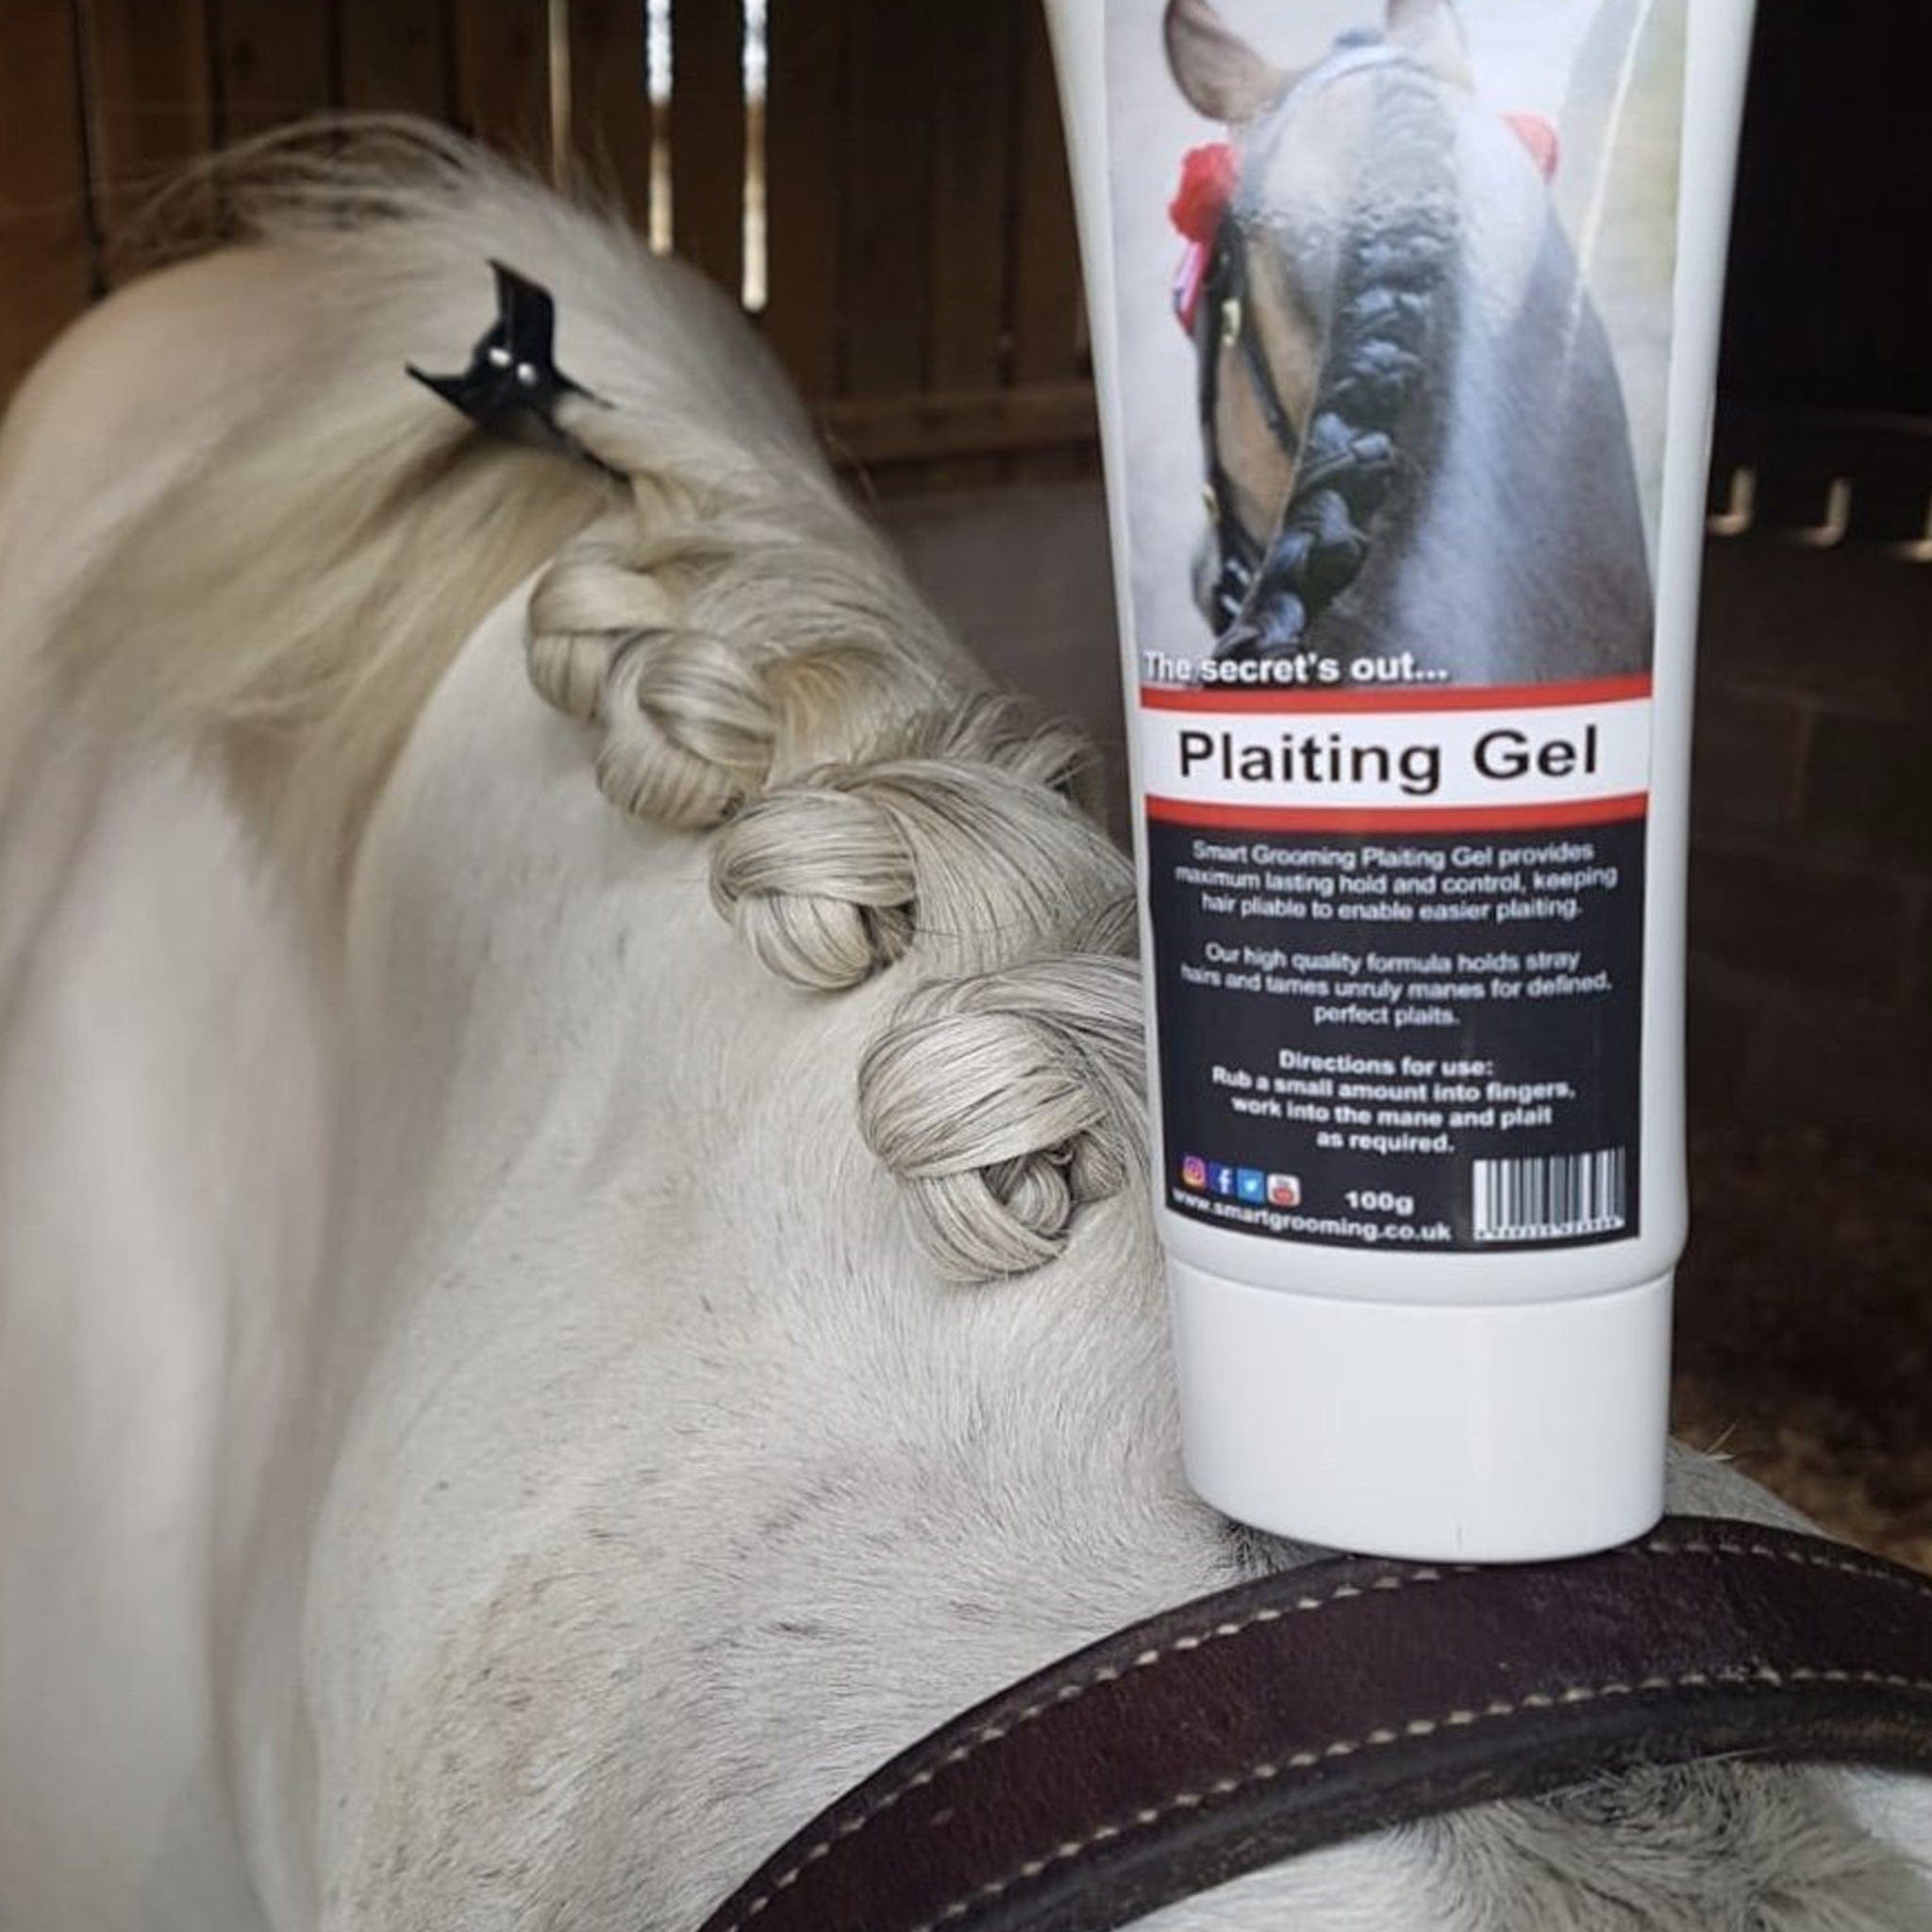 Smart Grooming Plaiting Gel On Grey Horse With Plaits